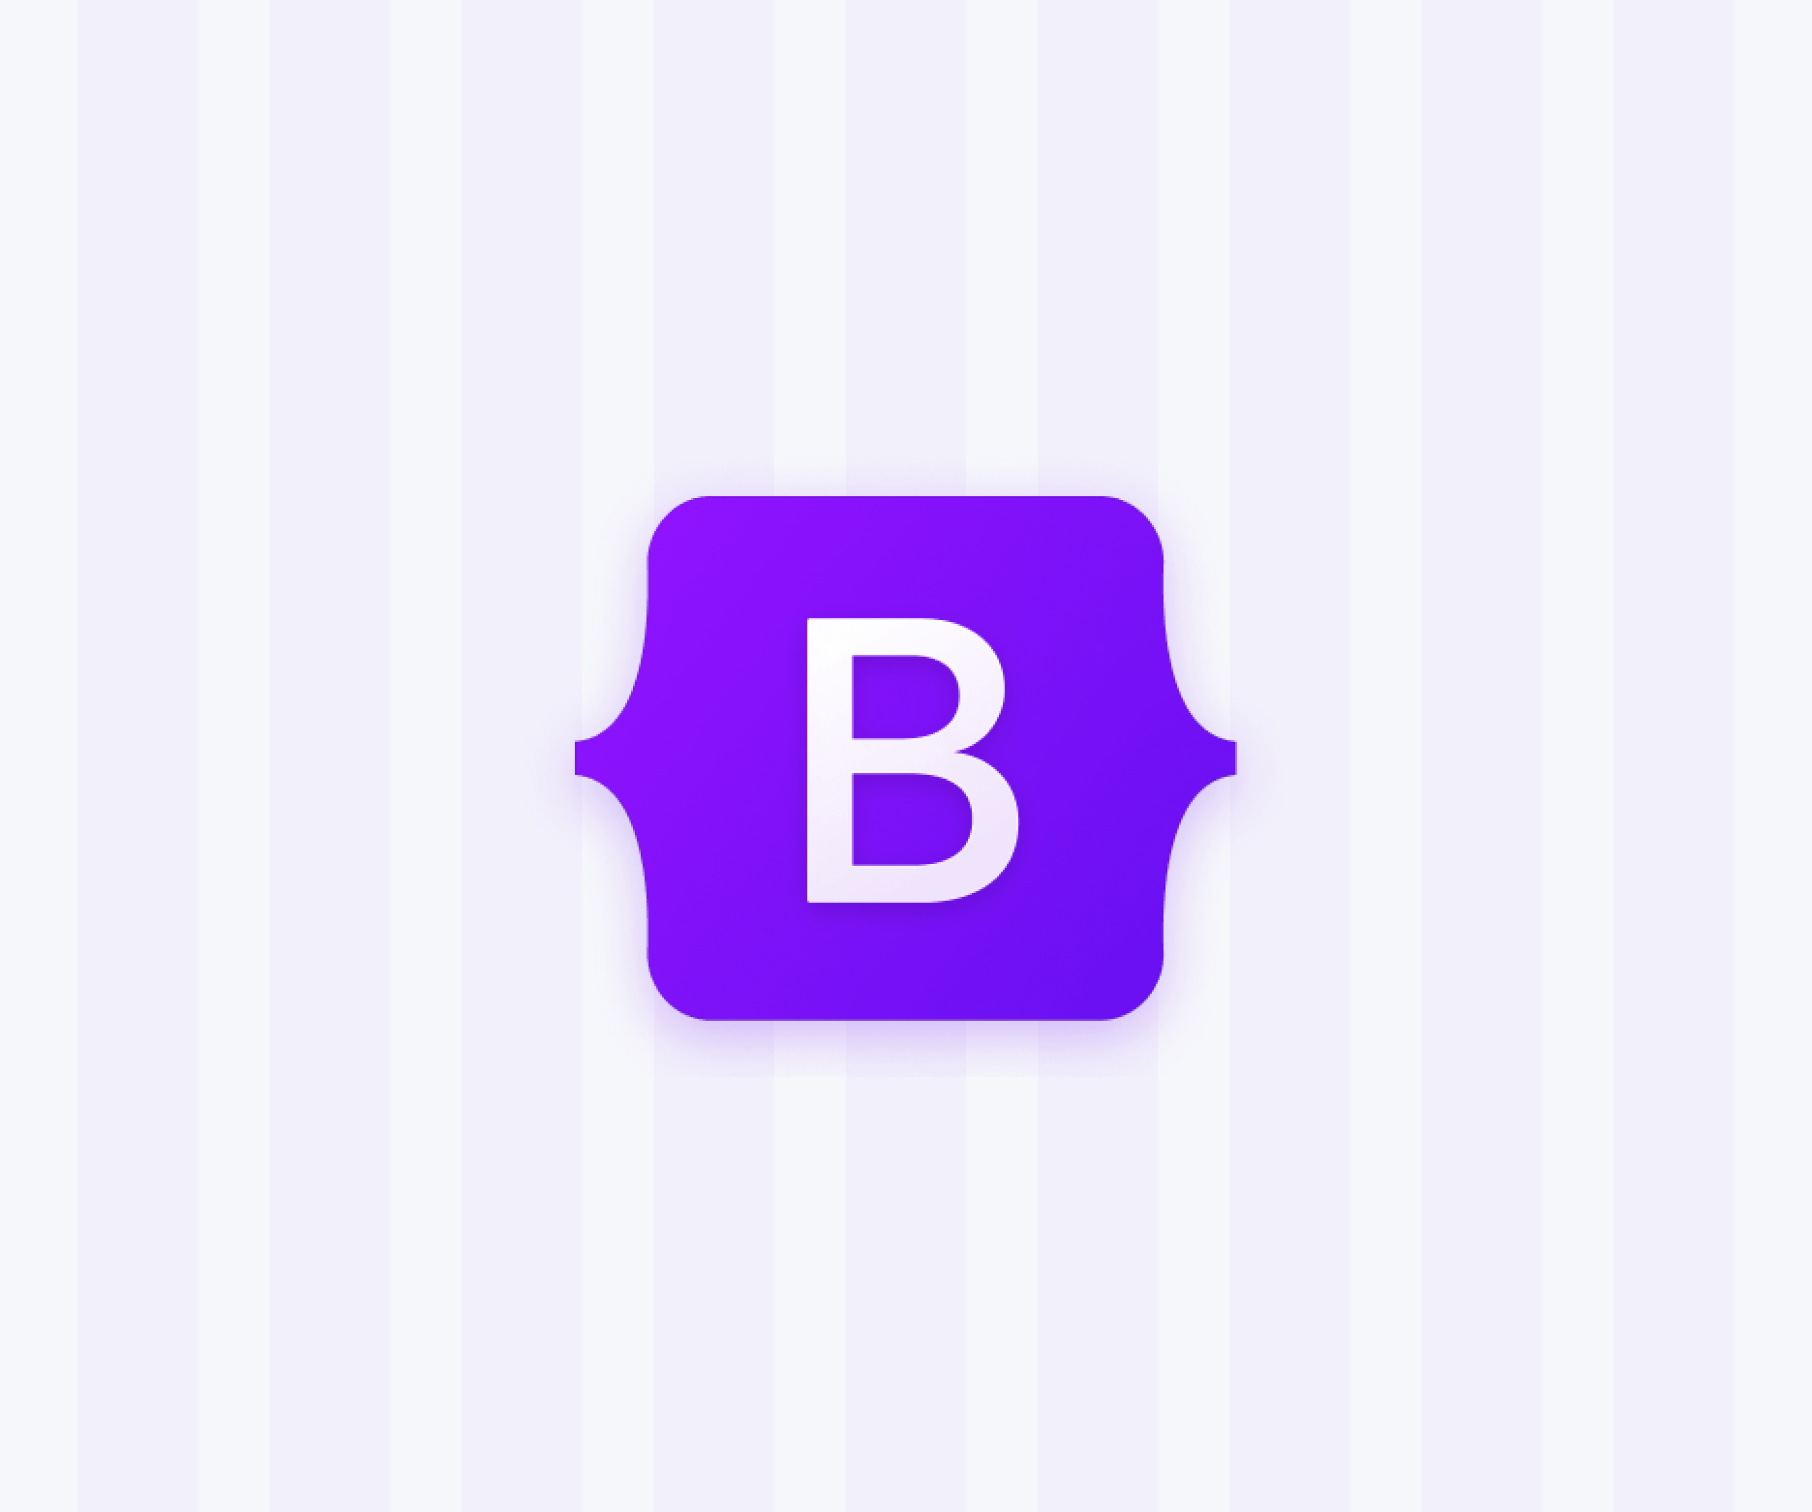 Bootstrap Grid System image